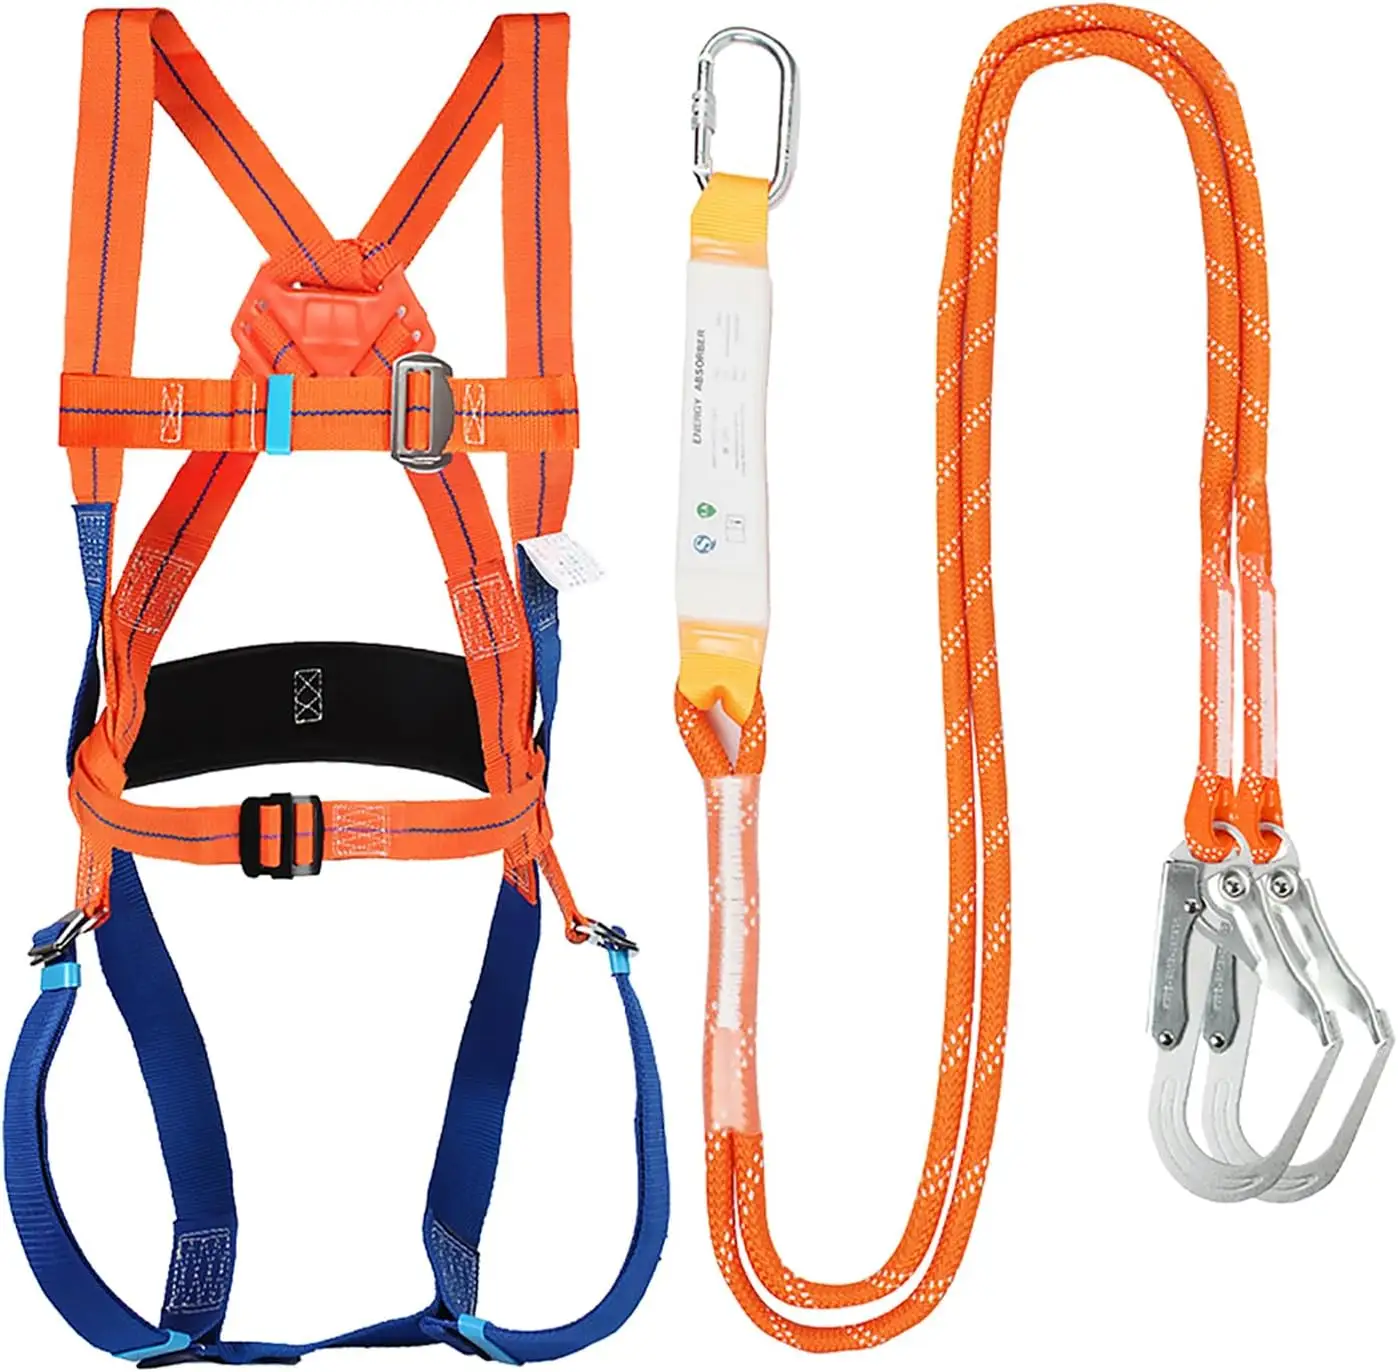 Safety Rope Belt Harnesses Safety Full Body Harness Double Hook Safety Belt Buckles with Lanyard Fall Protection